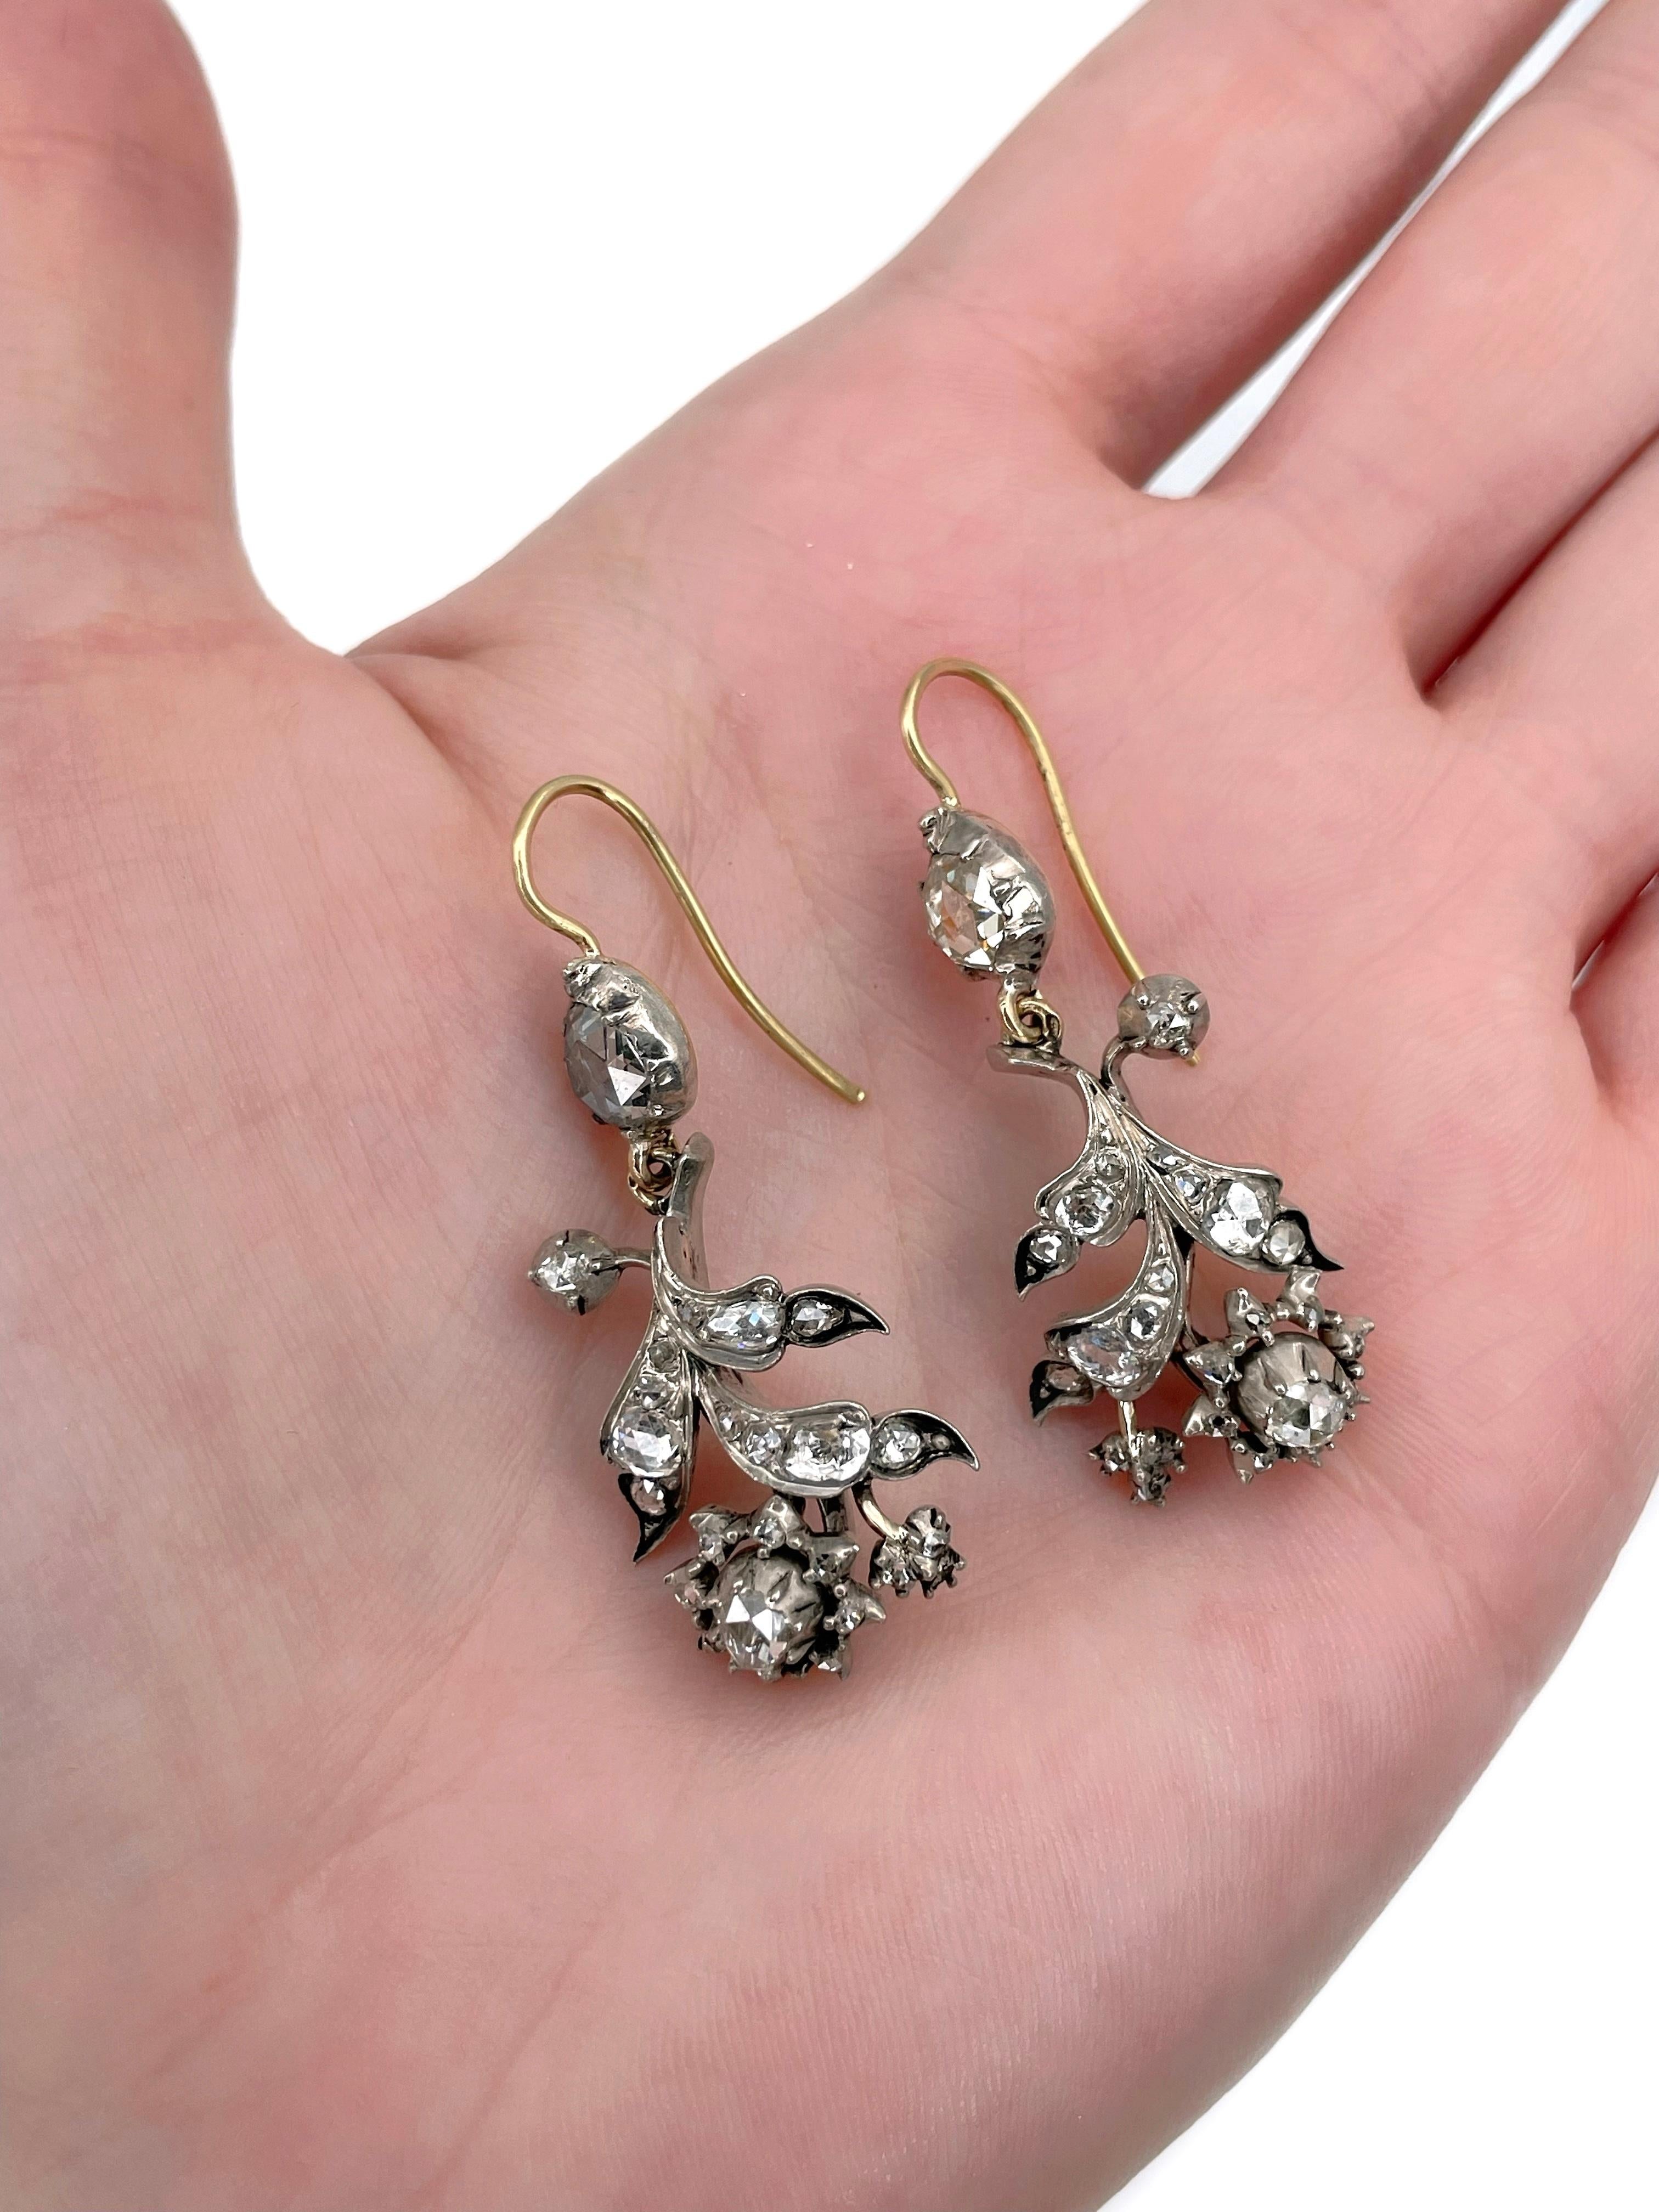 It is a lovely pair of Victorian floral dangle earrings crafted in 18K gold and adorned with silver. Circa 1880.

The piece features rose cut diamonds. 

Weight: 9.39g
Length: 4.2cm 

———

If you have any questions, please feel free to ask. We